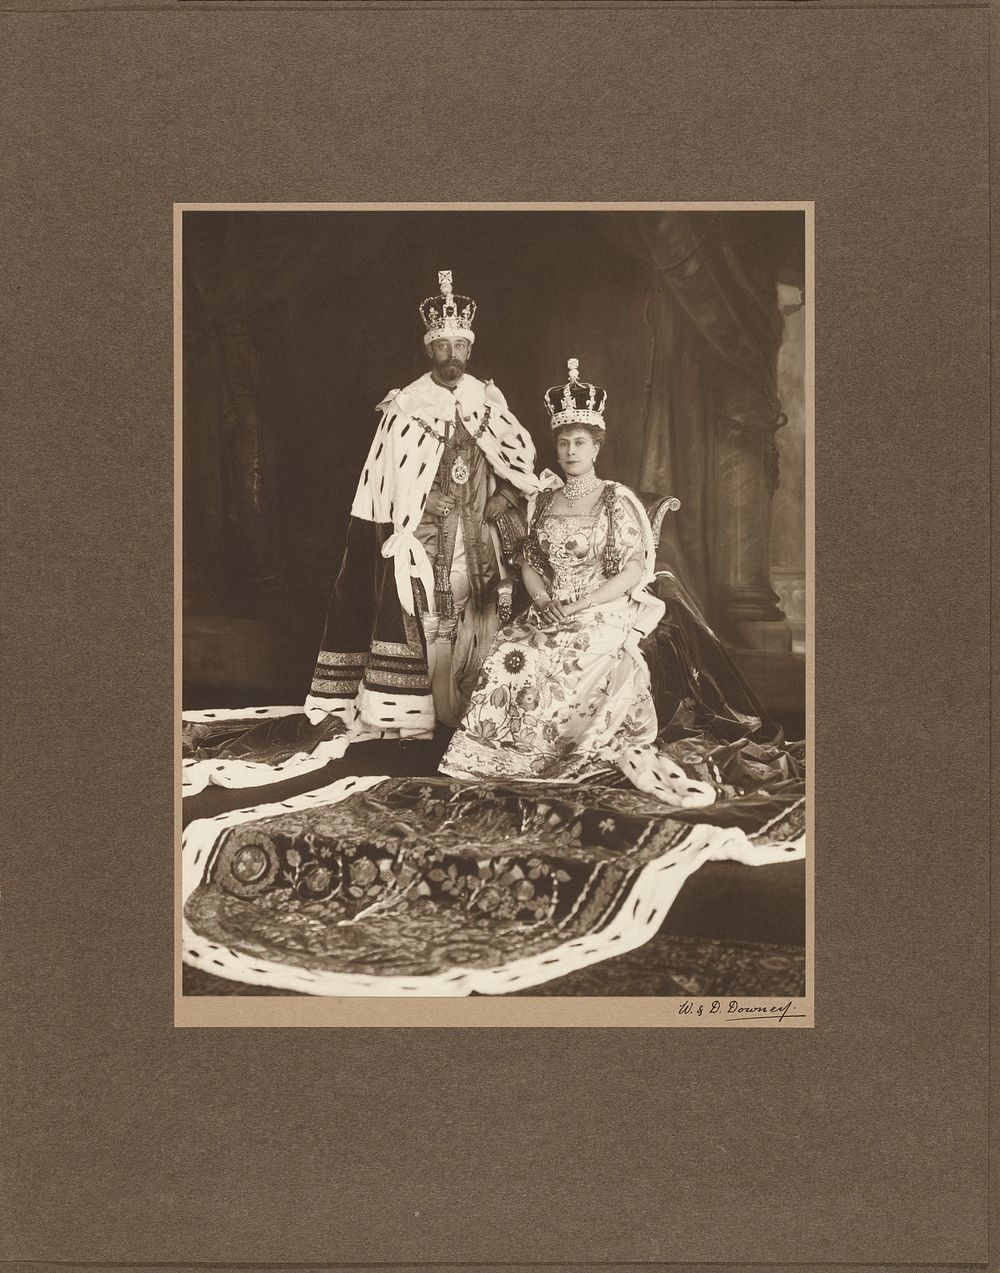 Coronation of King George V and Queen Mary by William Downey